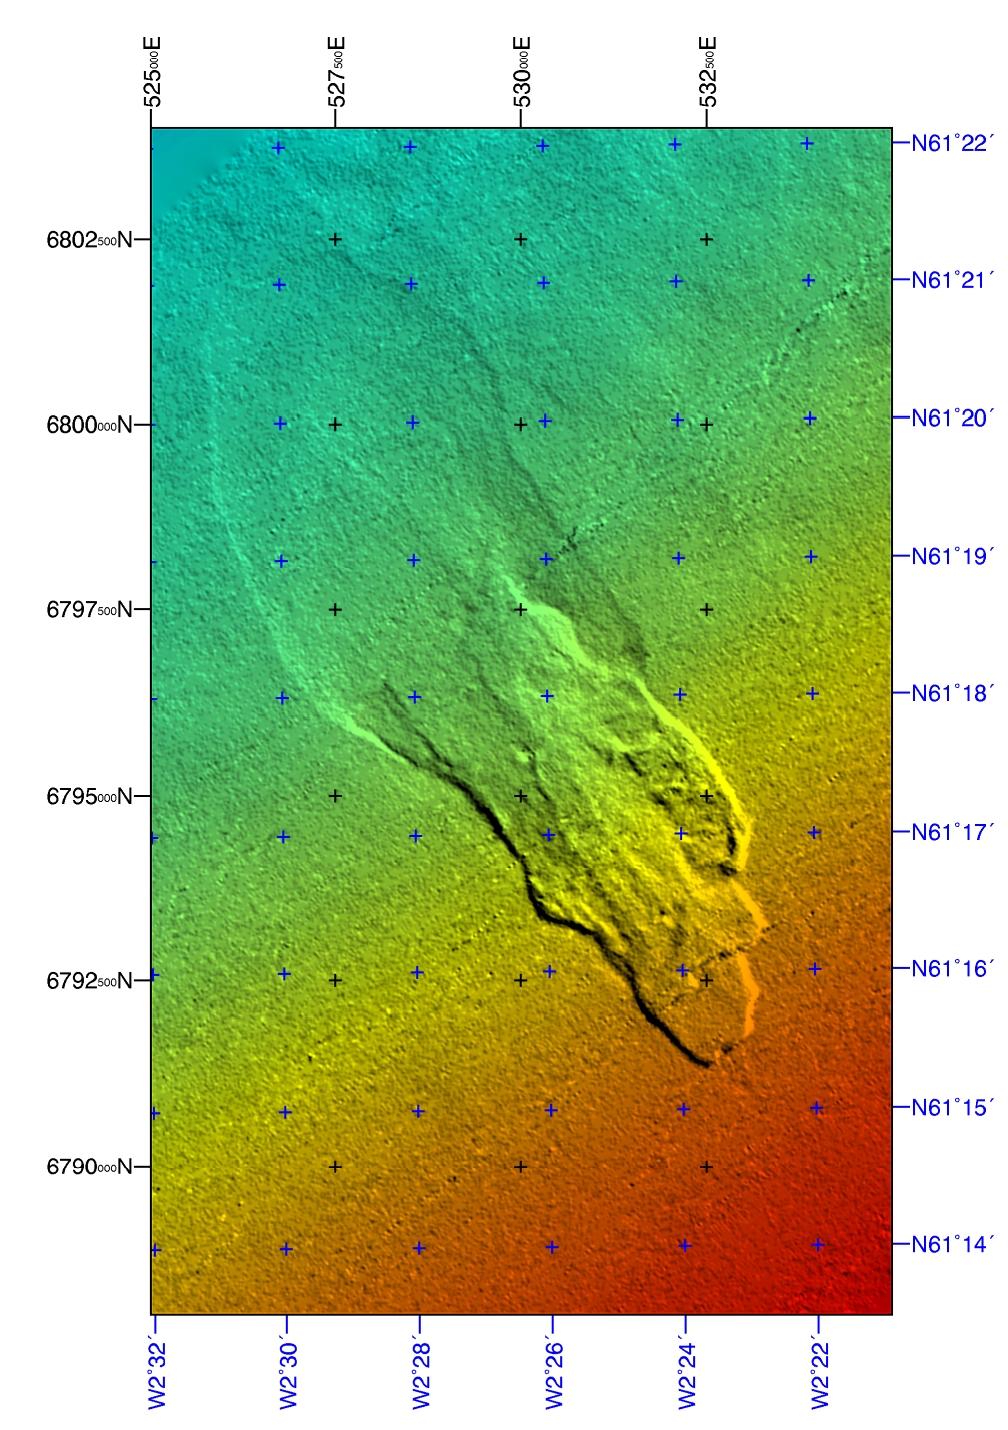 208 Bulat example of the seismic data along the axis of the slide. A 3D horizon of the seabed was generated using a Landmark Graphics workstation and then imaged using ER Mapper.